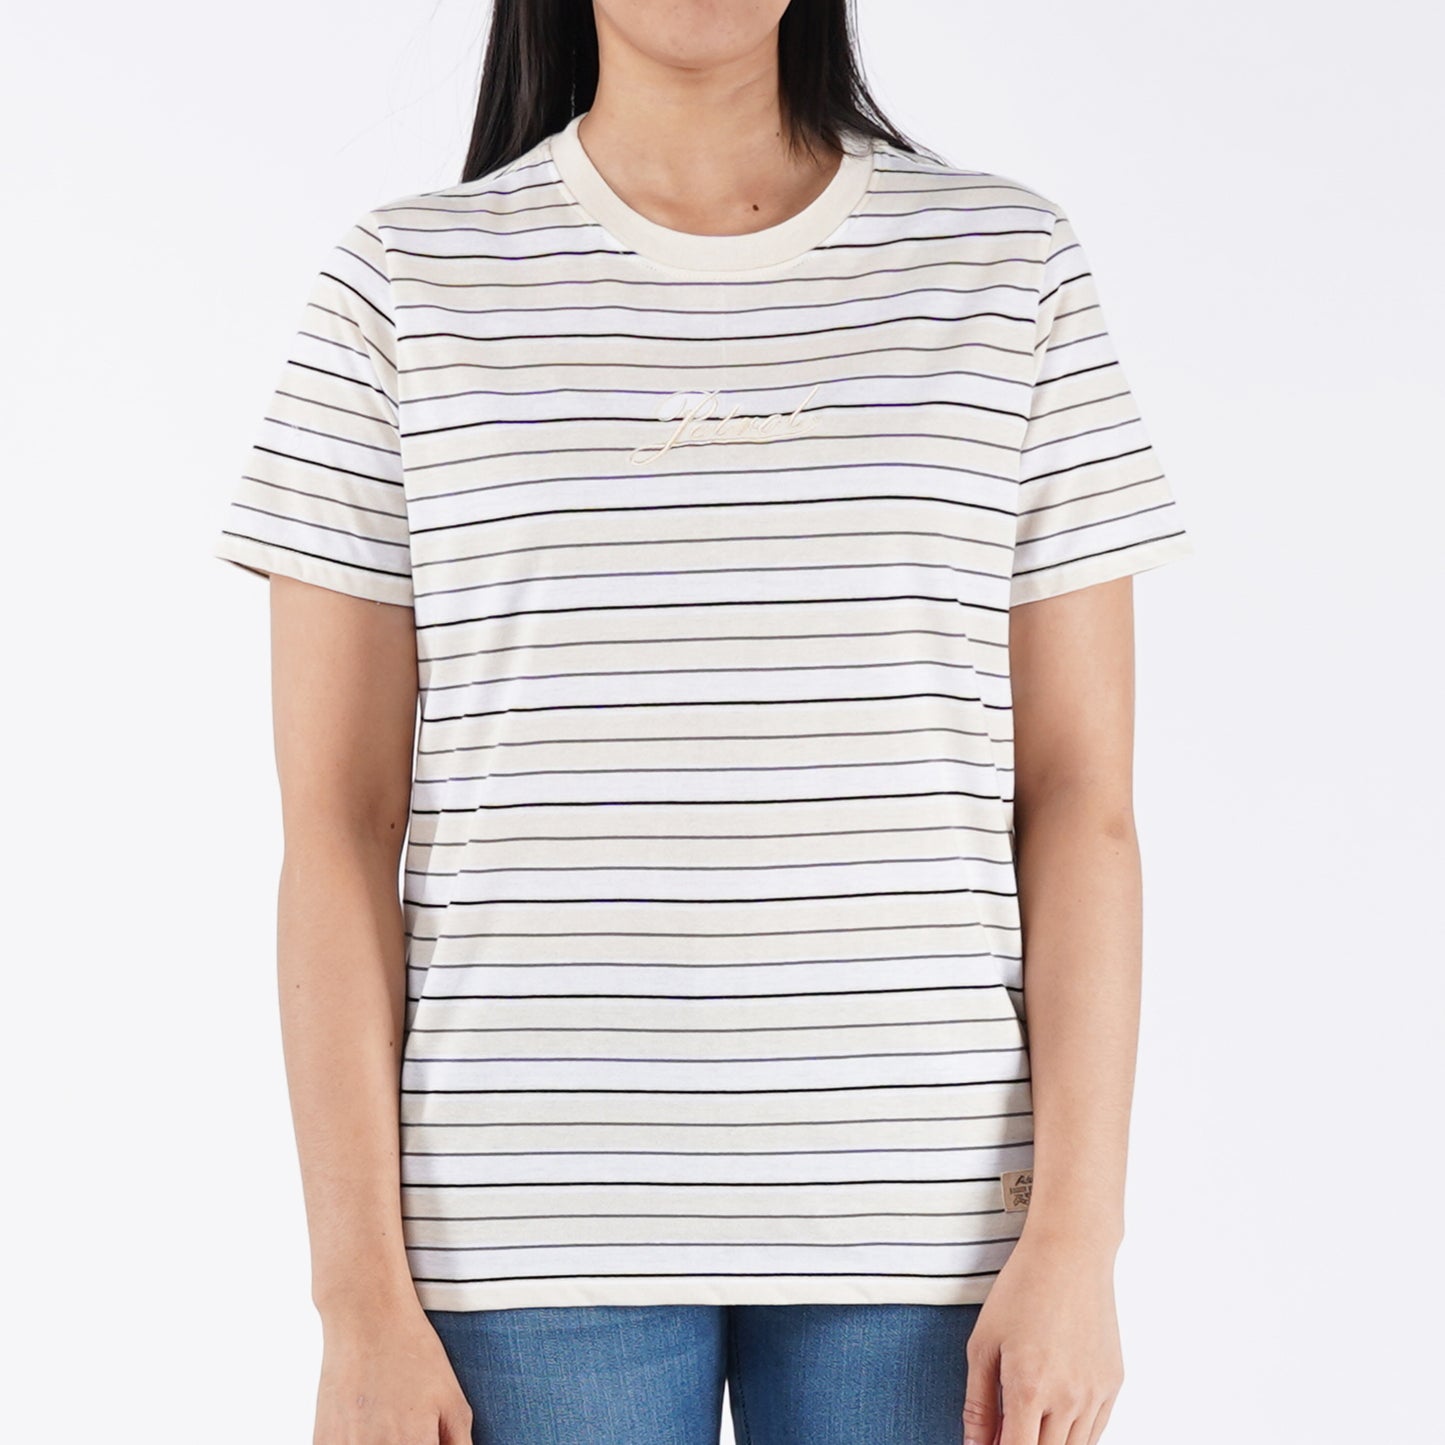 Petrol Basic Tees for Ladies Relaxed Fitting Shirt Stripe Jersey Fabric Trendy fashion Casual Top Beige T-shirt for Ladies 117676 (Beige)